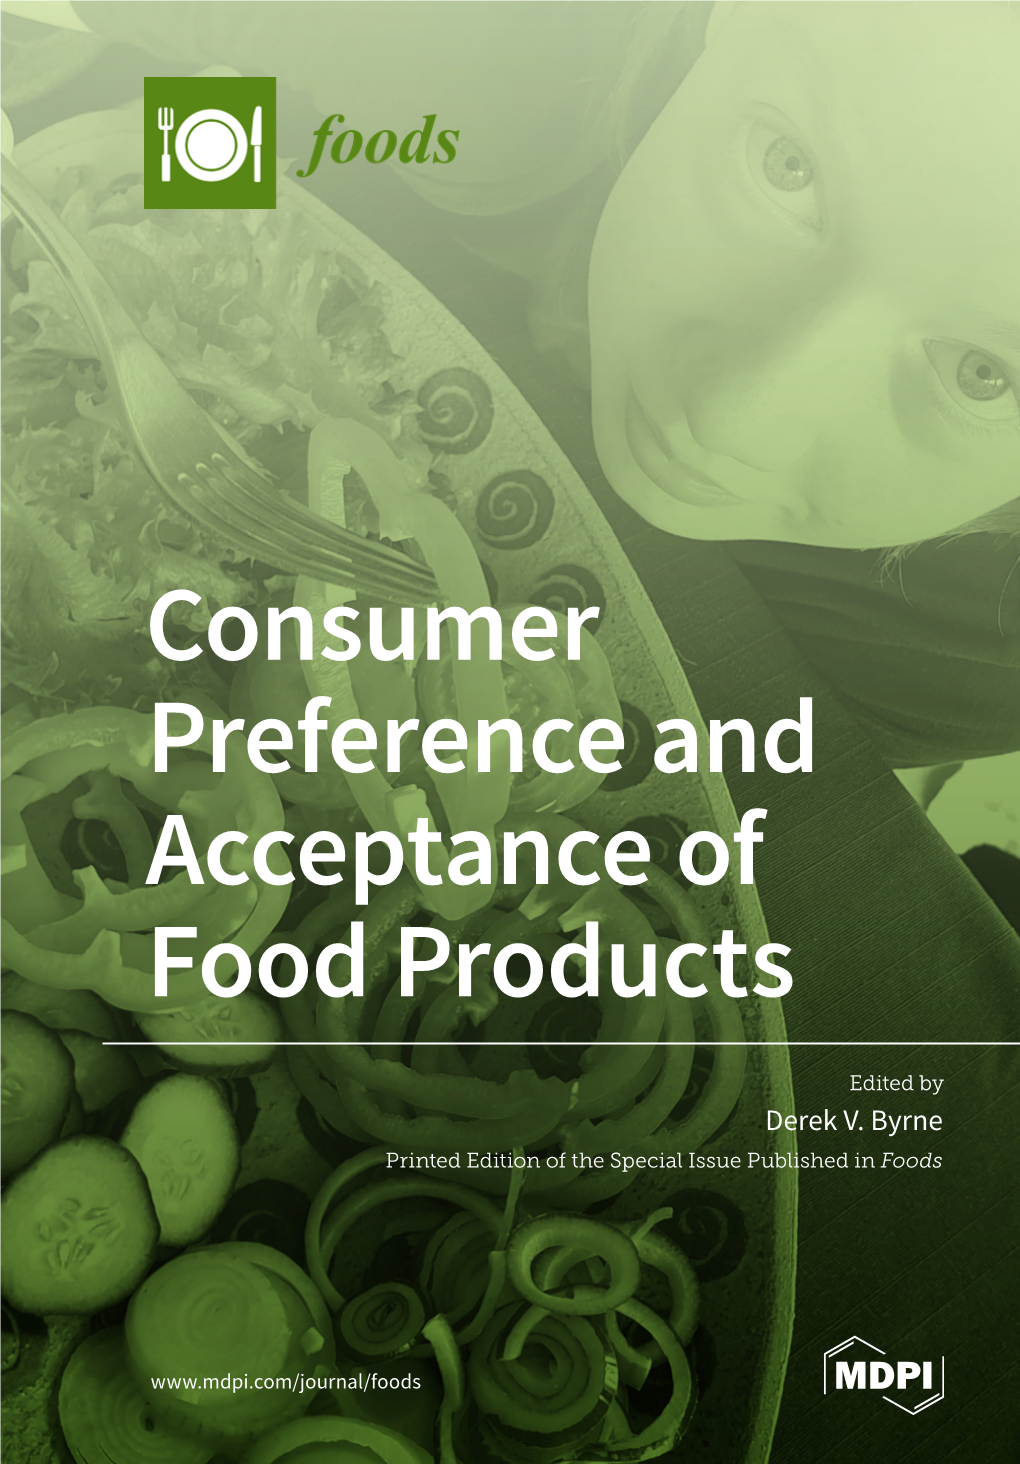 Consumer Preference and Acceptance of Food Products • Derek V